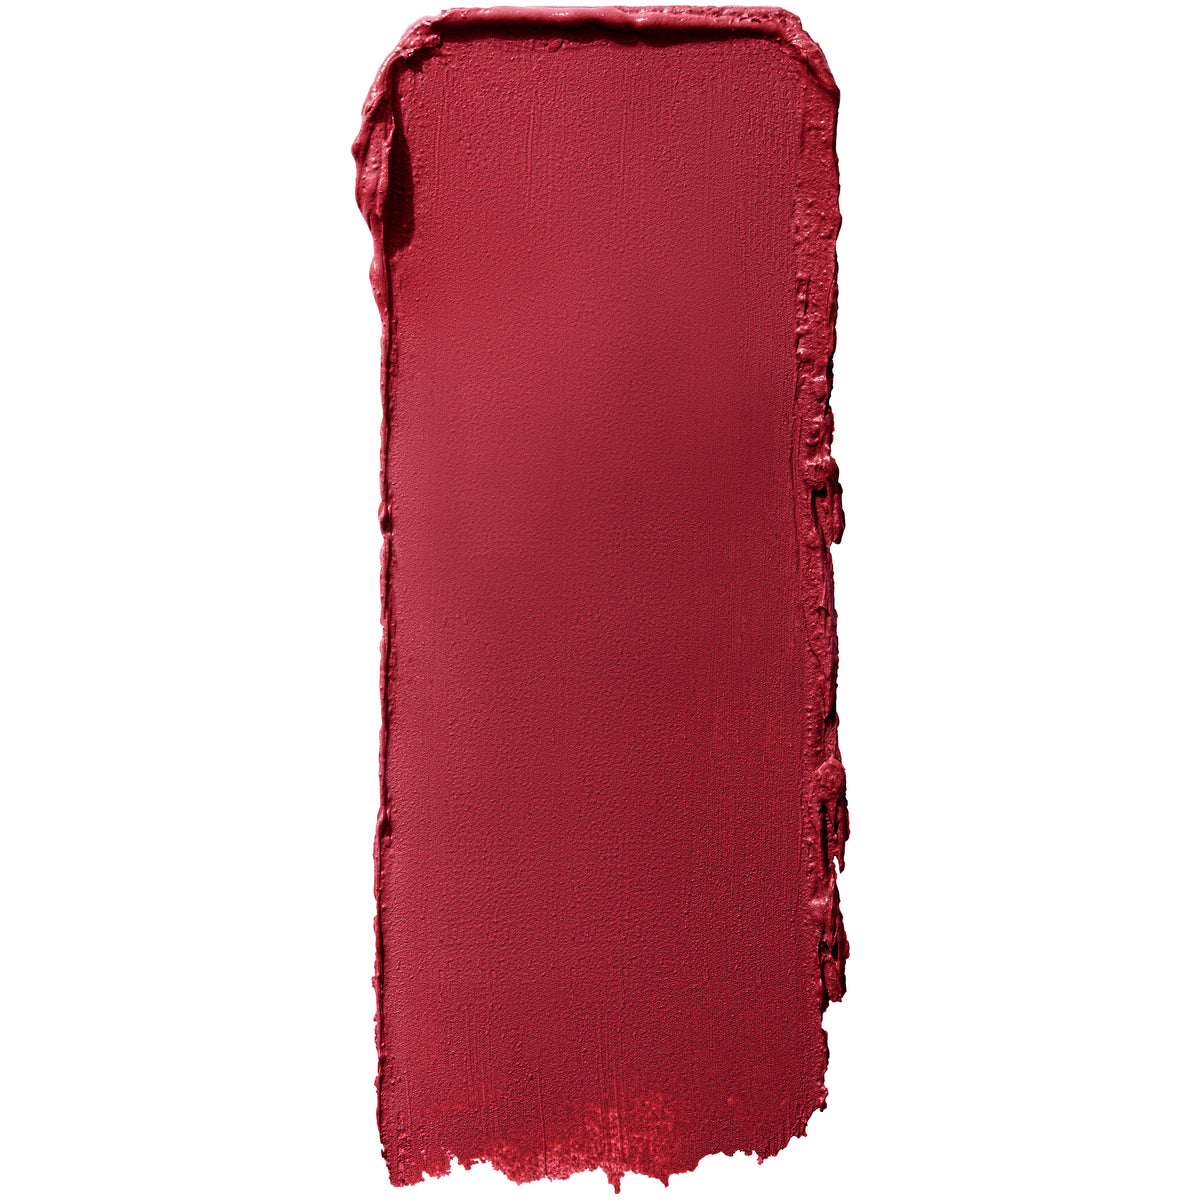 MAYBELLINE Superstay Matte Ink Crayon Lipstick - Own Your Empire